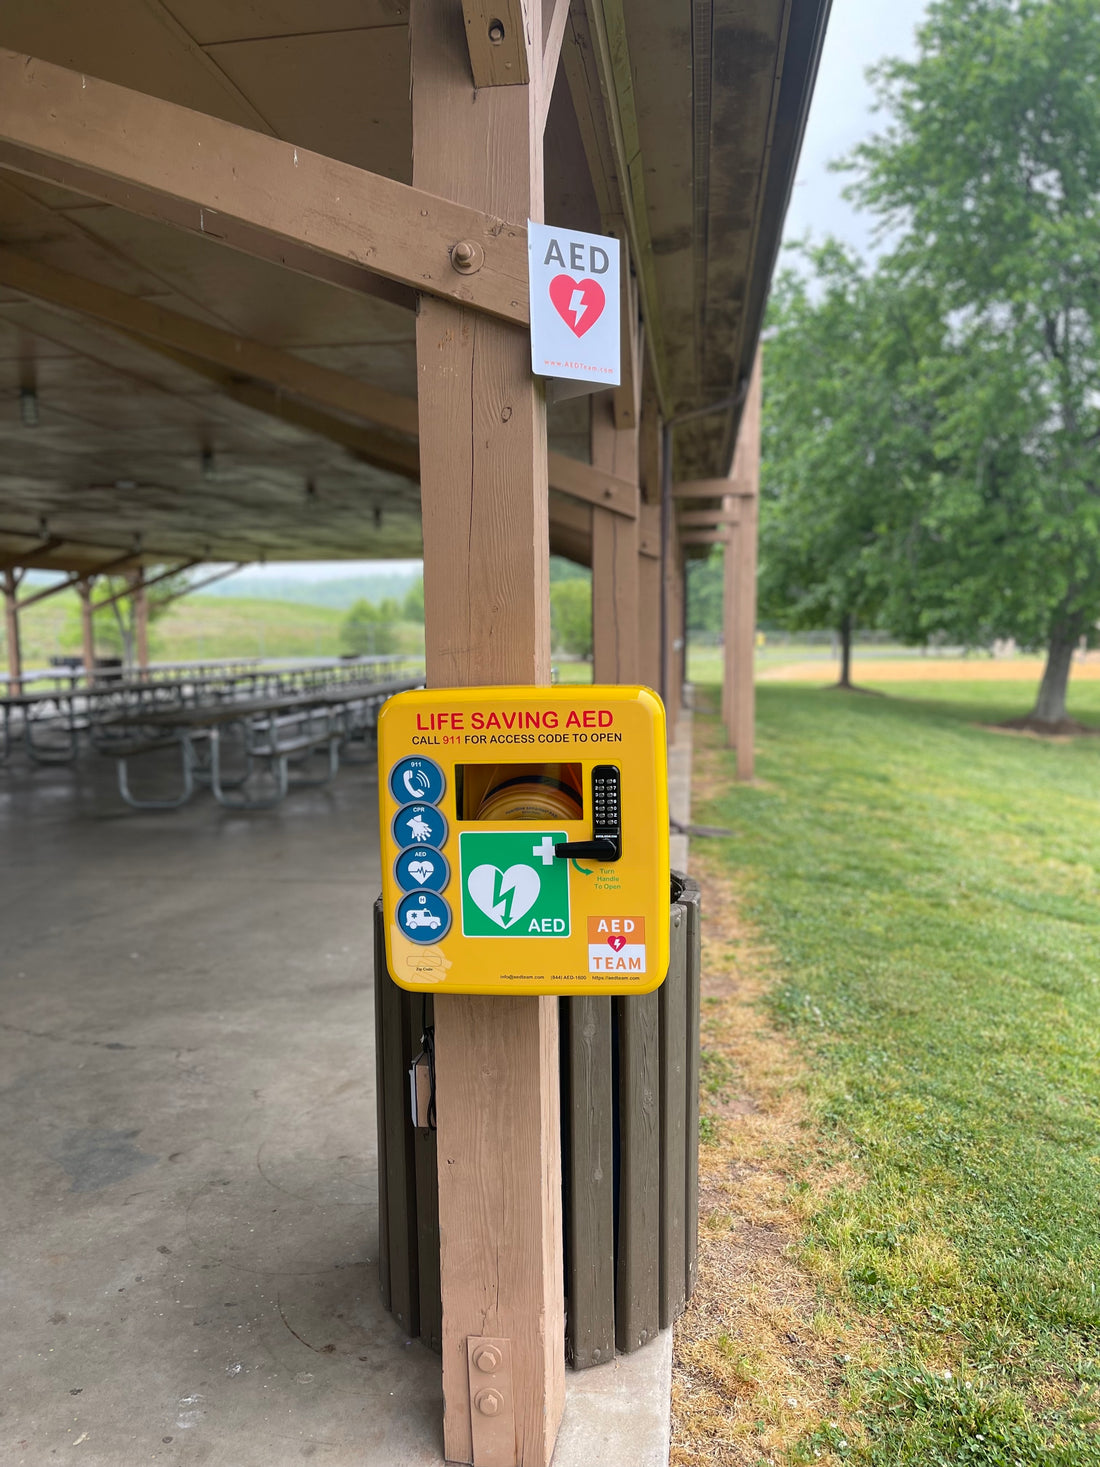 New Hampshire Public Safety Agencies Adopt Innovative Solution for AED Access